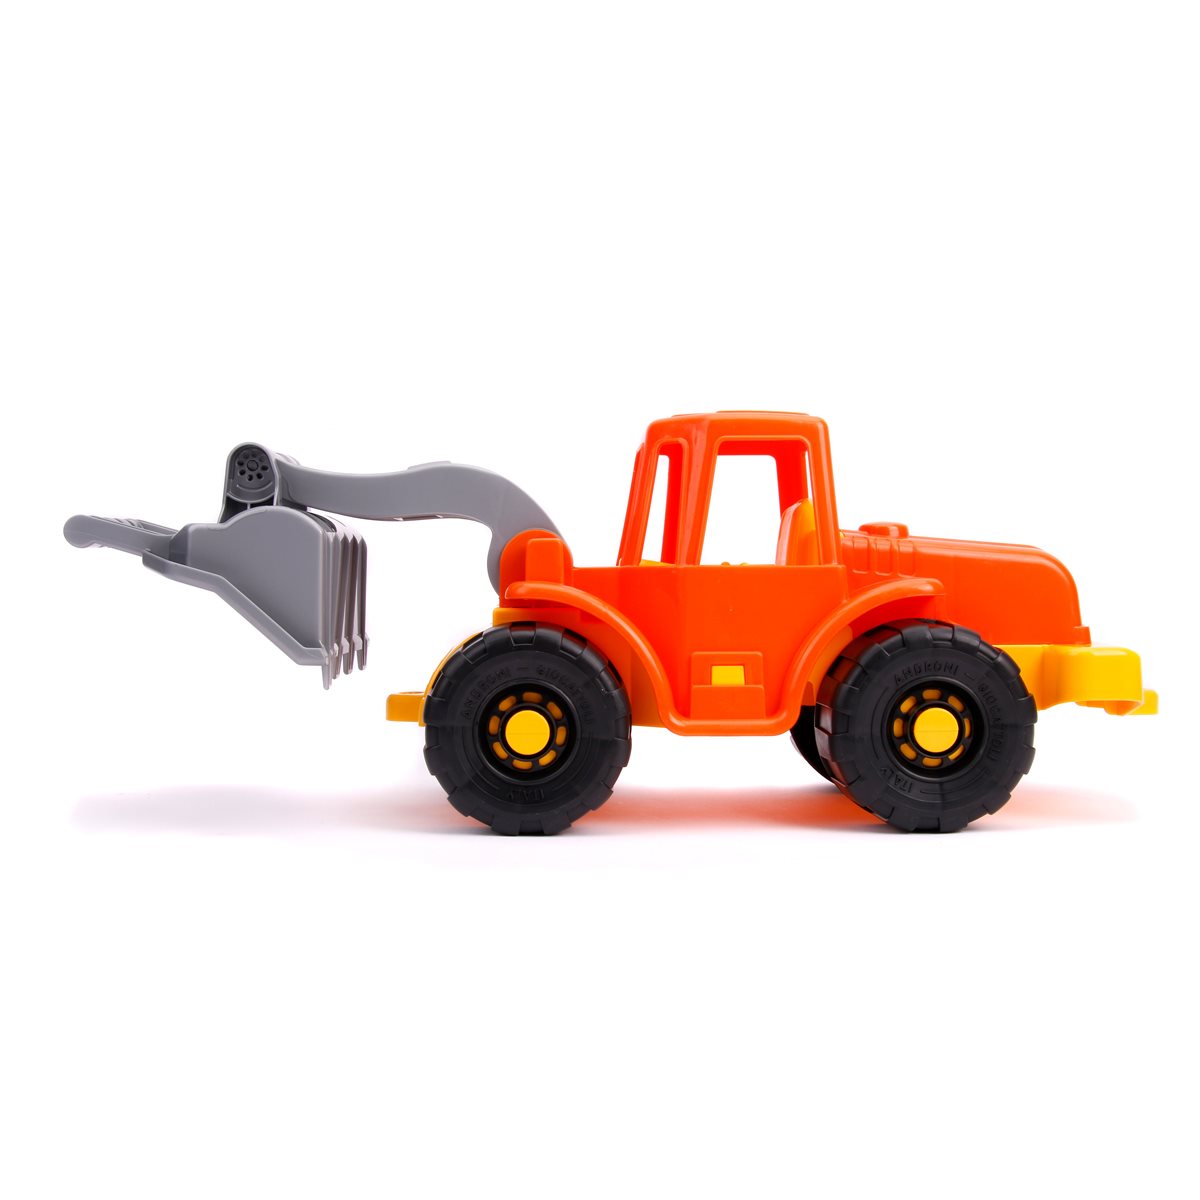 Androni Giocattoli Giant Front Loader - Entertainment Earth